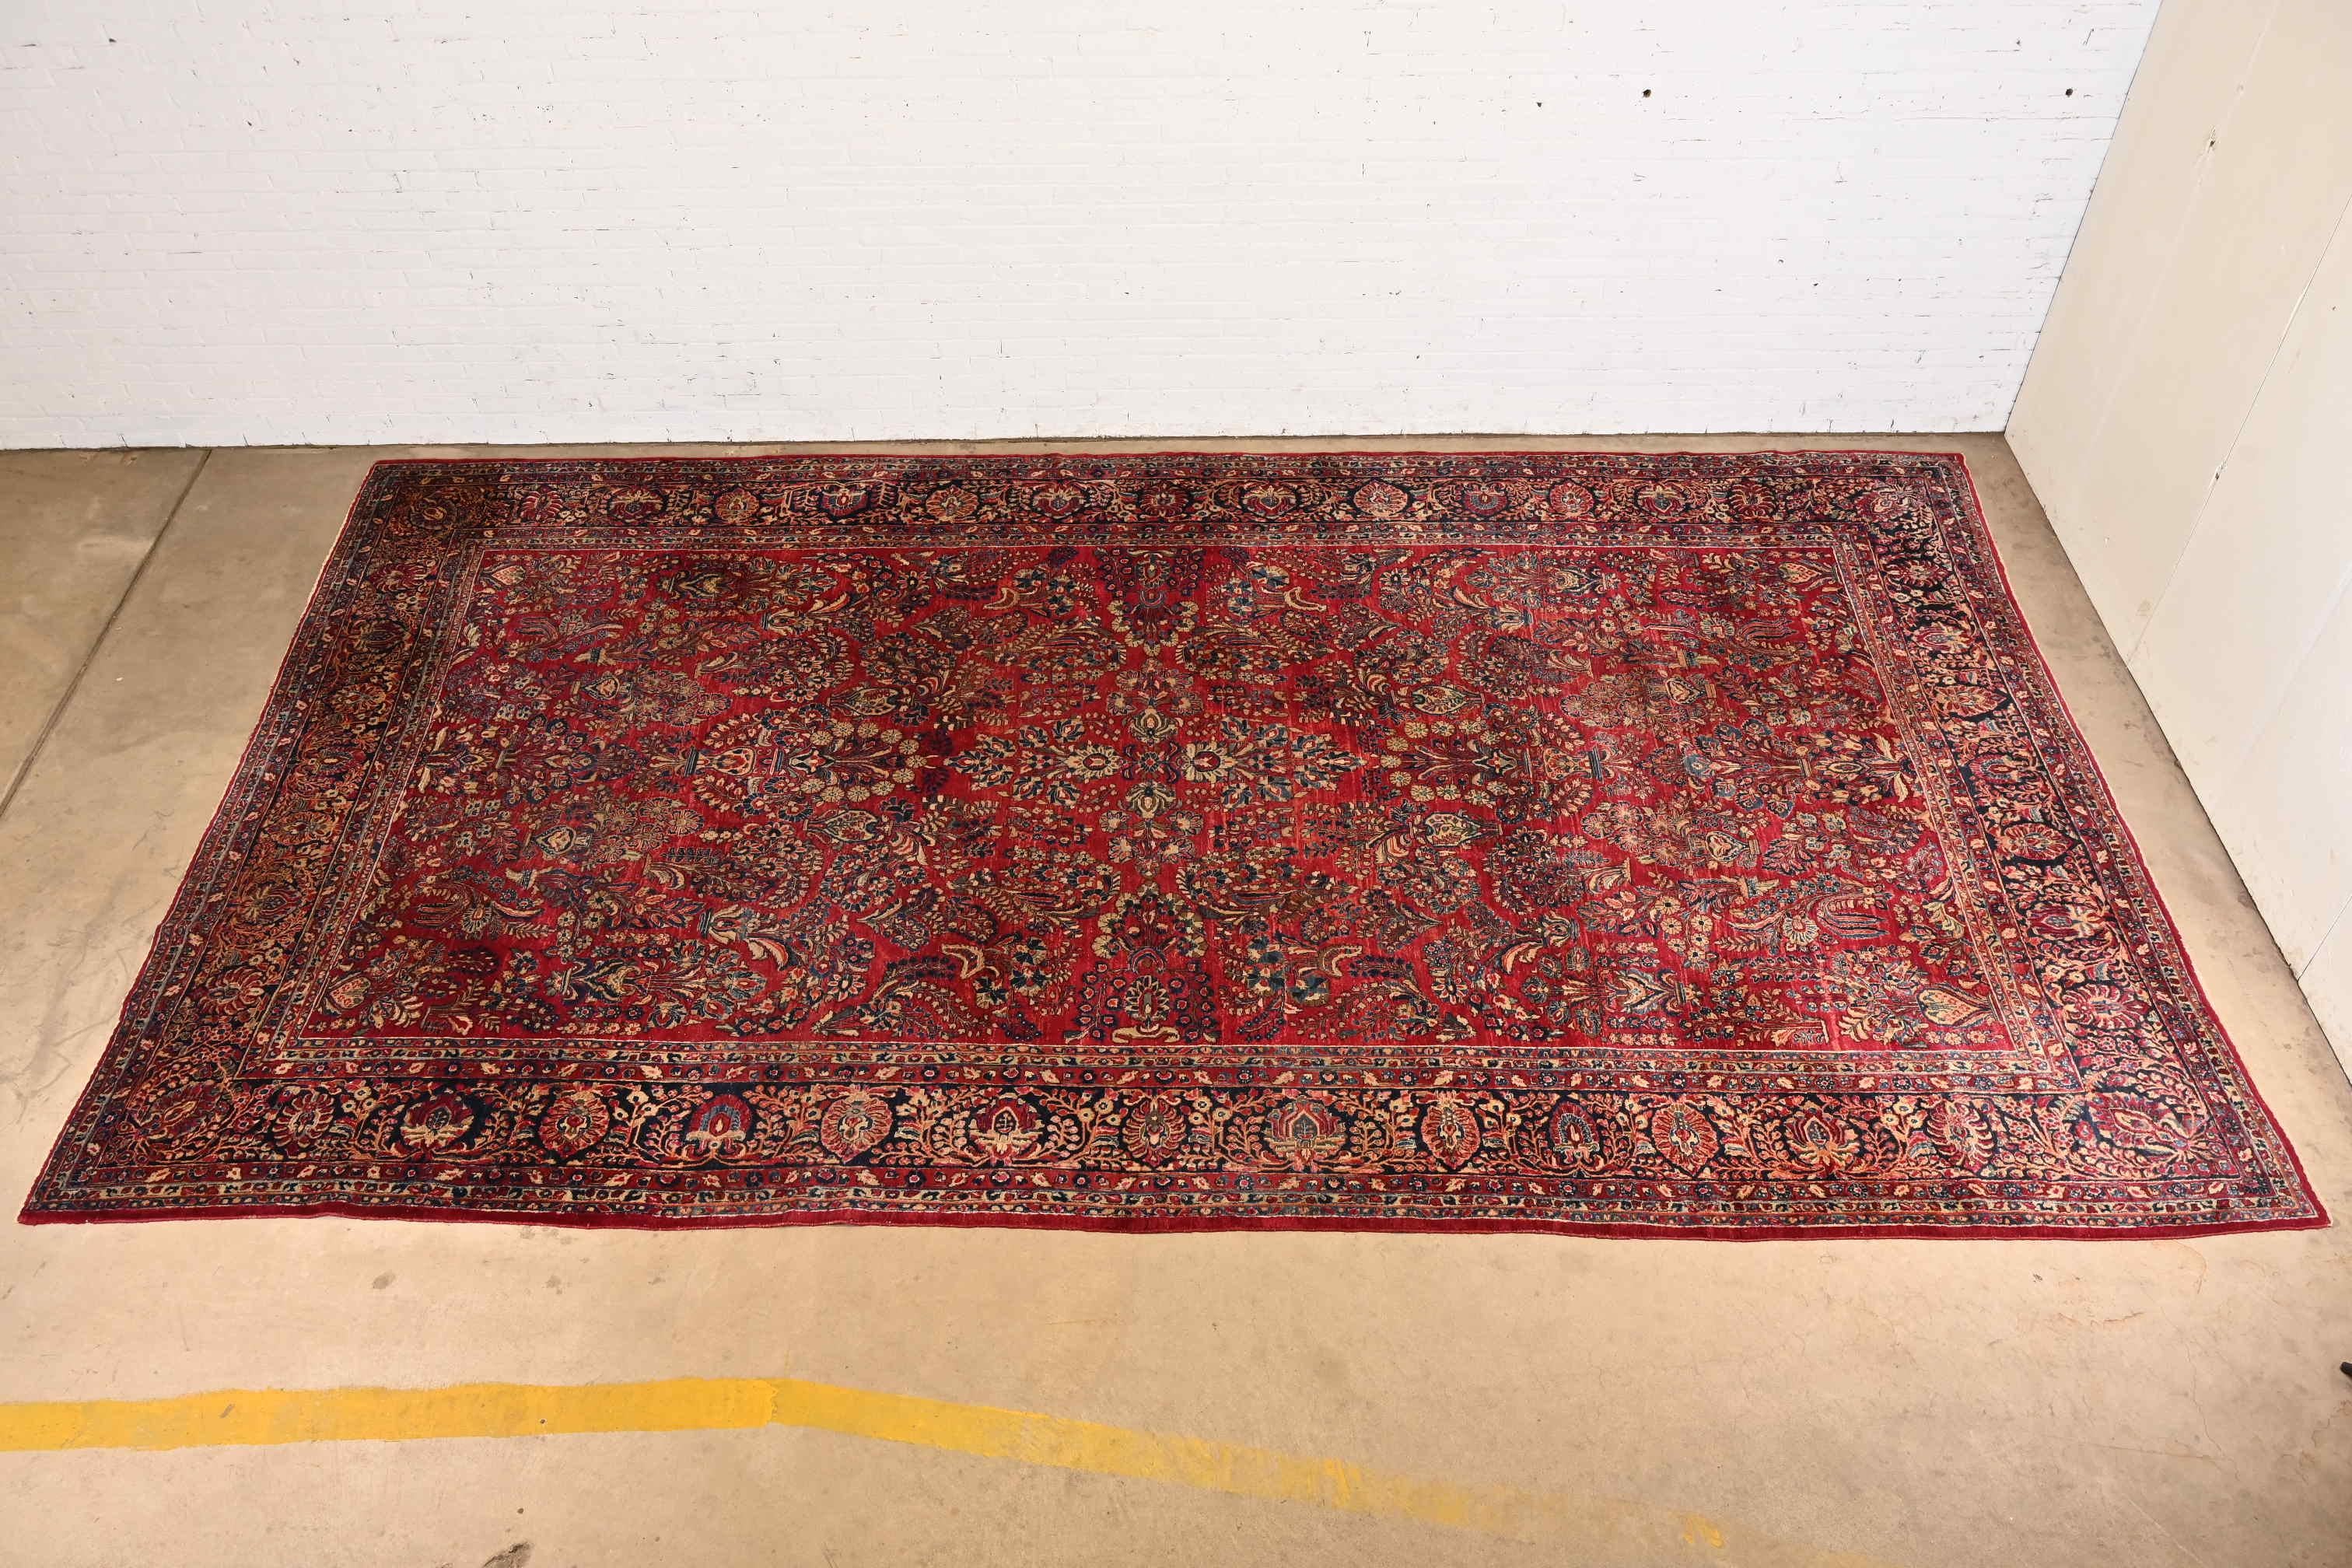 A gorgeous antique Persian Sarouk large room size rug

Circa 1930s

Features beautiful traditional floral sprays and bouquets, with predominant colors in red, blue, and ivory.

Measures: 10'2